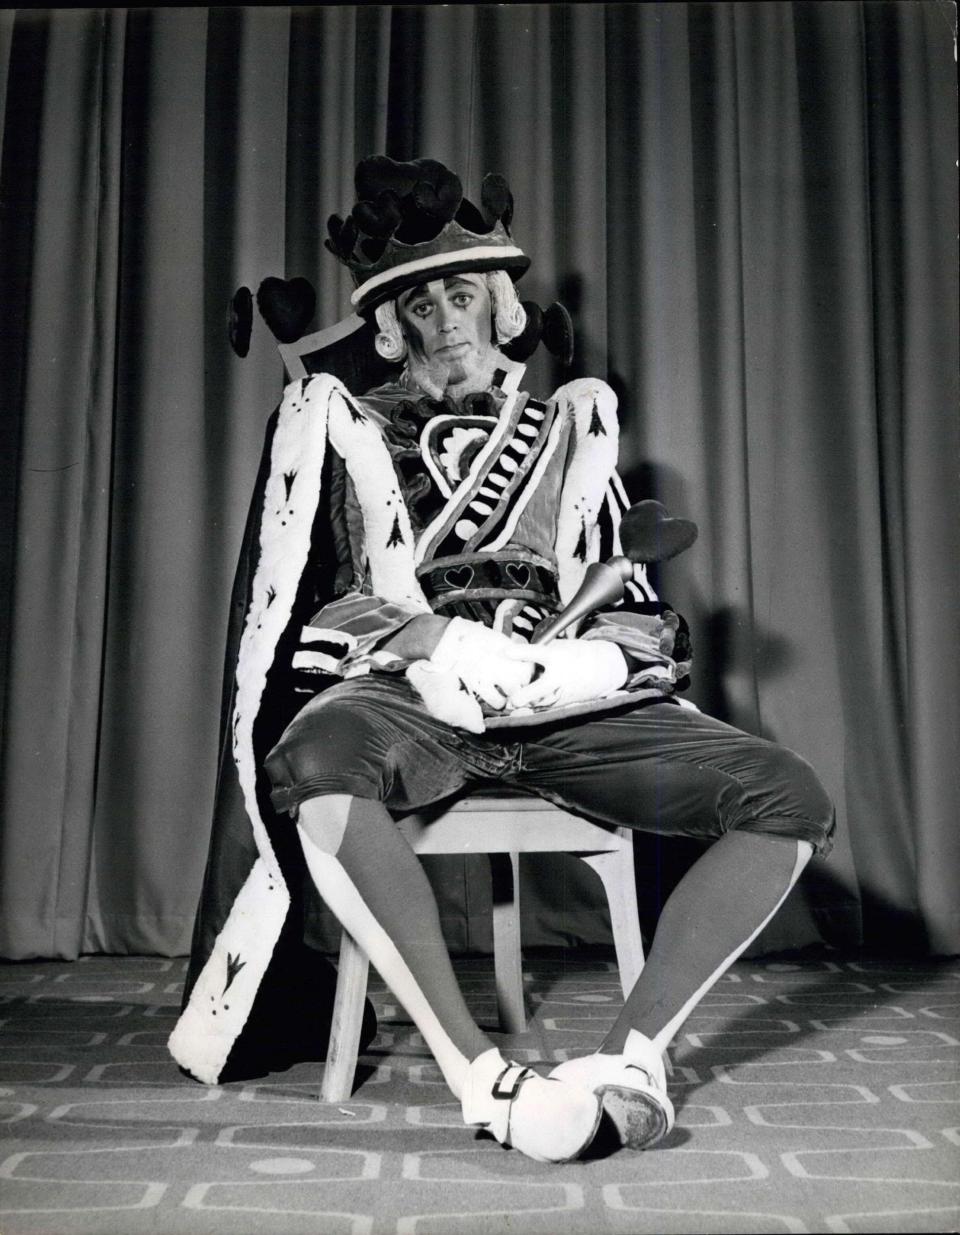 Peter White as the King of Hearts in the ballet Alice in Wonderland, with music by Horovitz and choreography by Michael Charnley - Zuma Press/Alamy